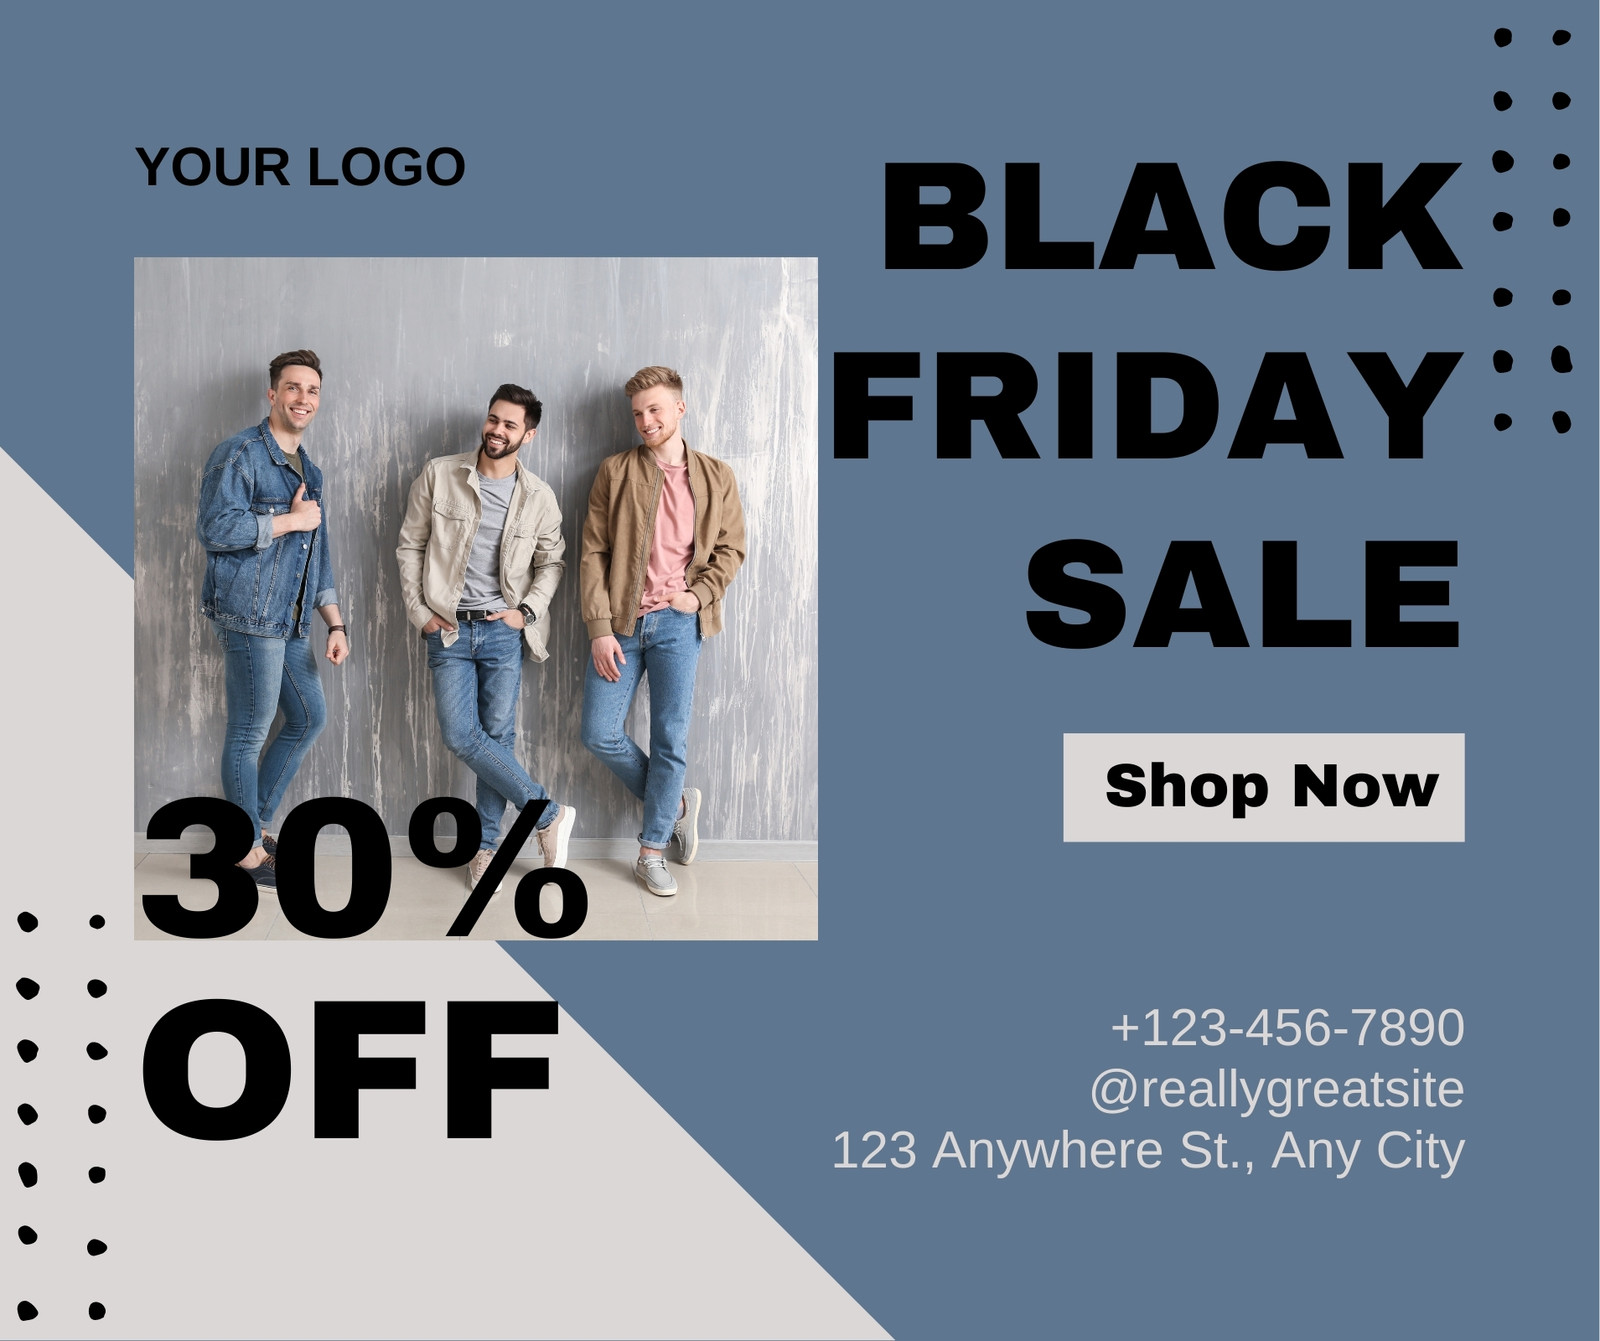 Page 10 - Free and customizable black friday templates